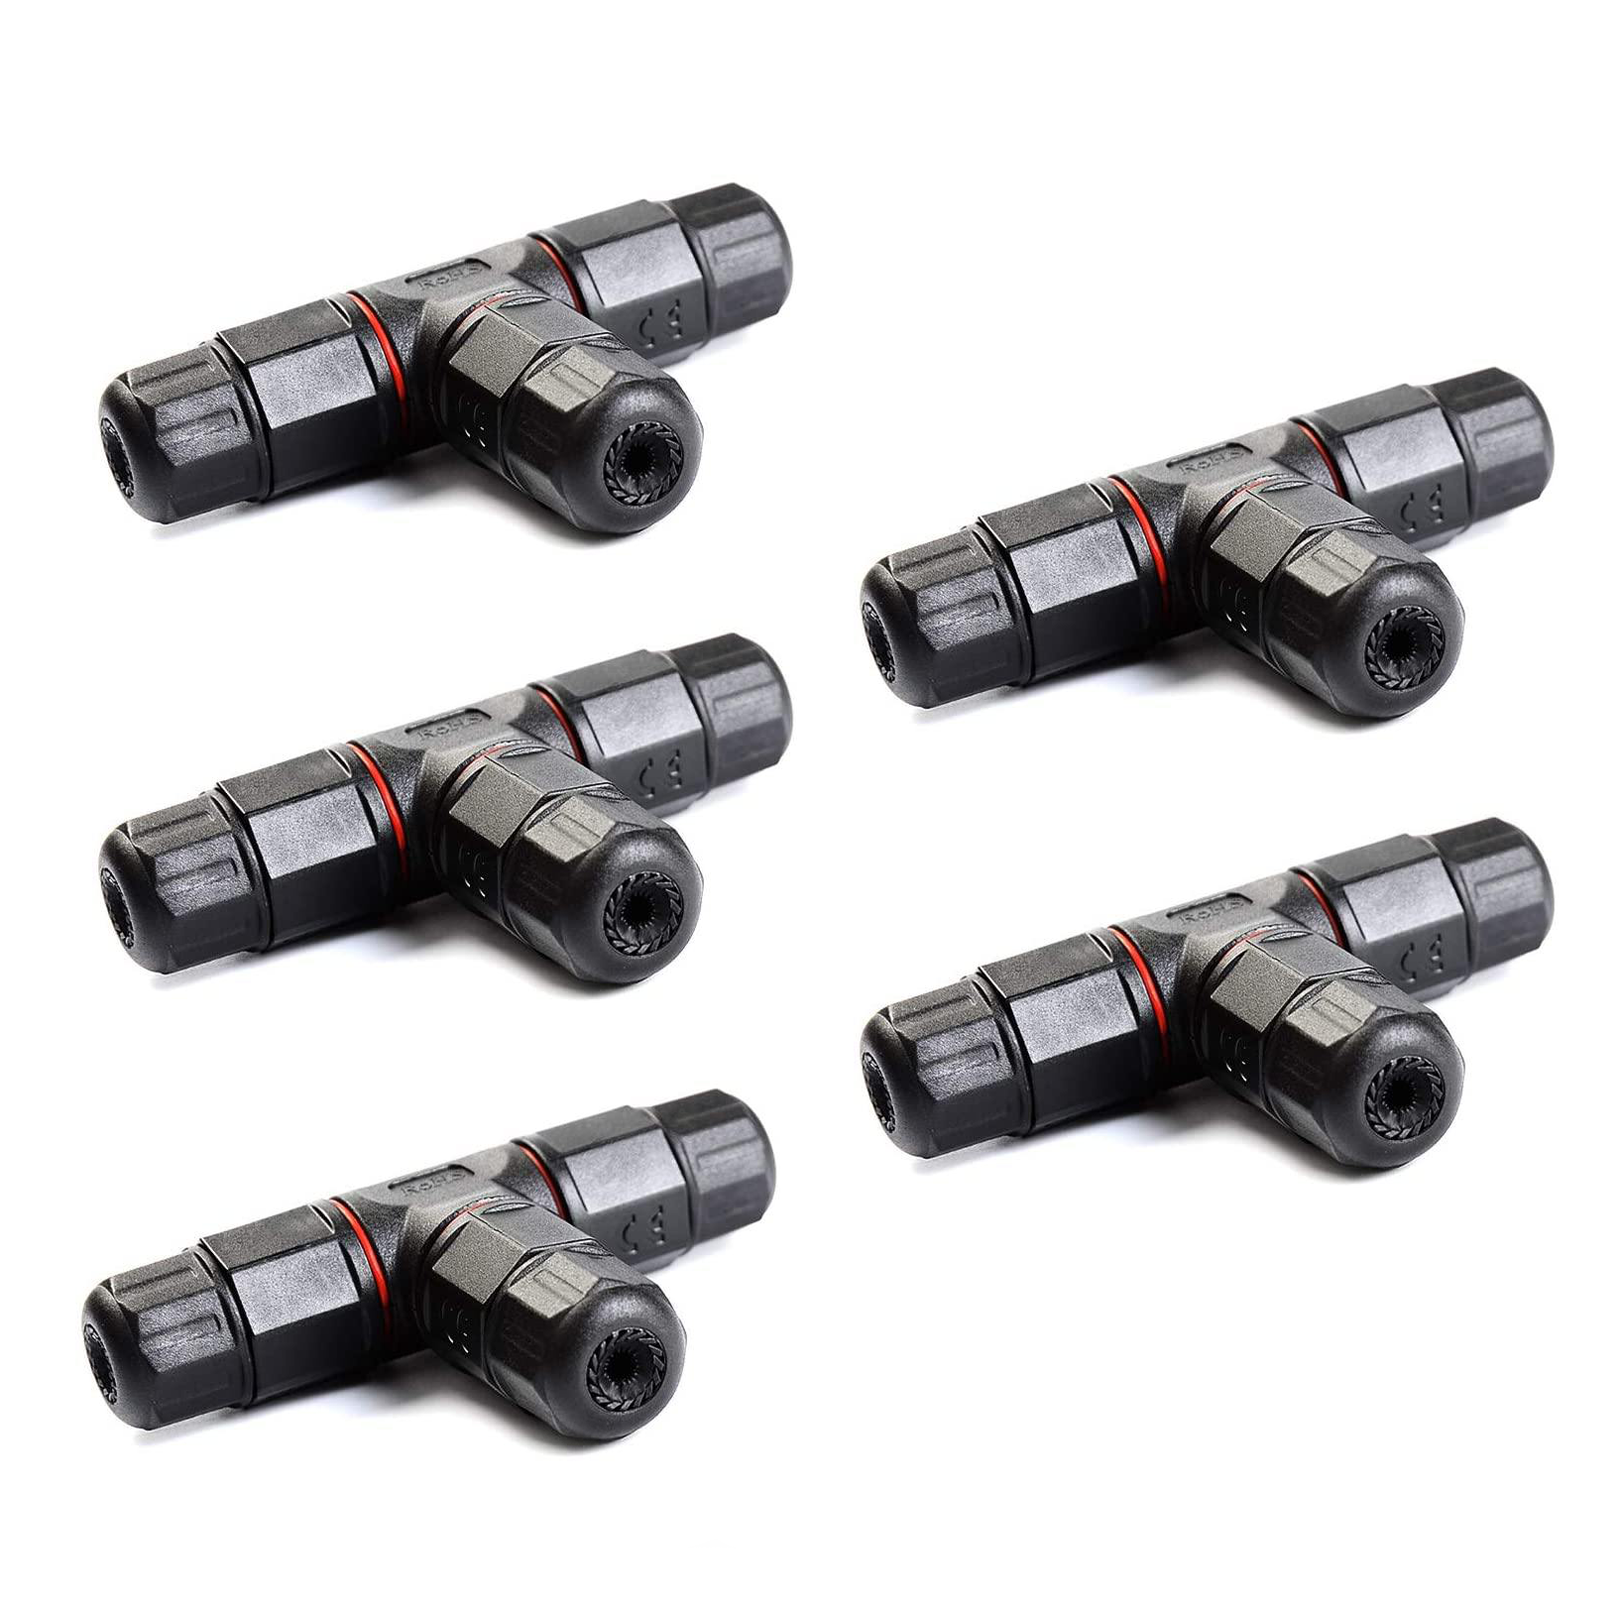 Junction Box Cable Connector Waterproof Outdoor/External Junction Box Cable Connector Sleeve Ø 5mm-10mm (3 Way Black) Pack of 5